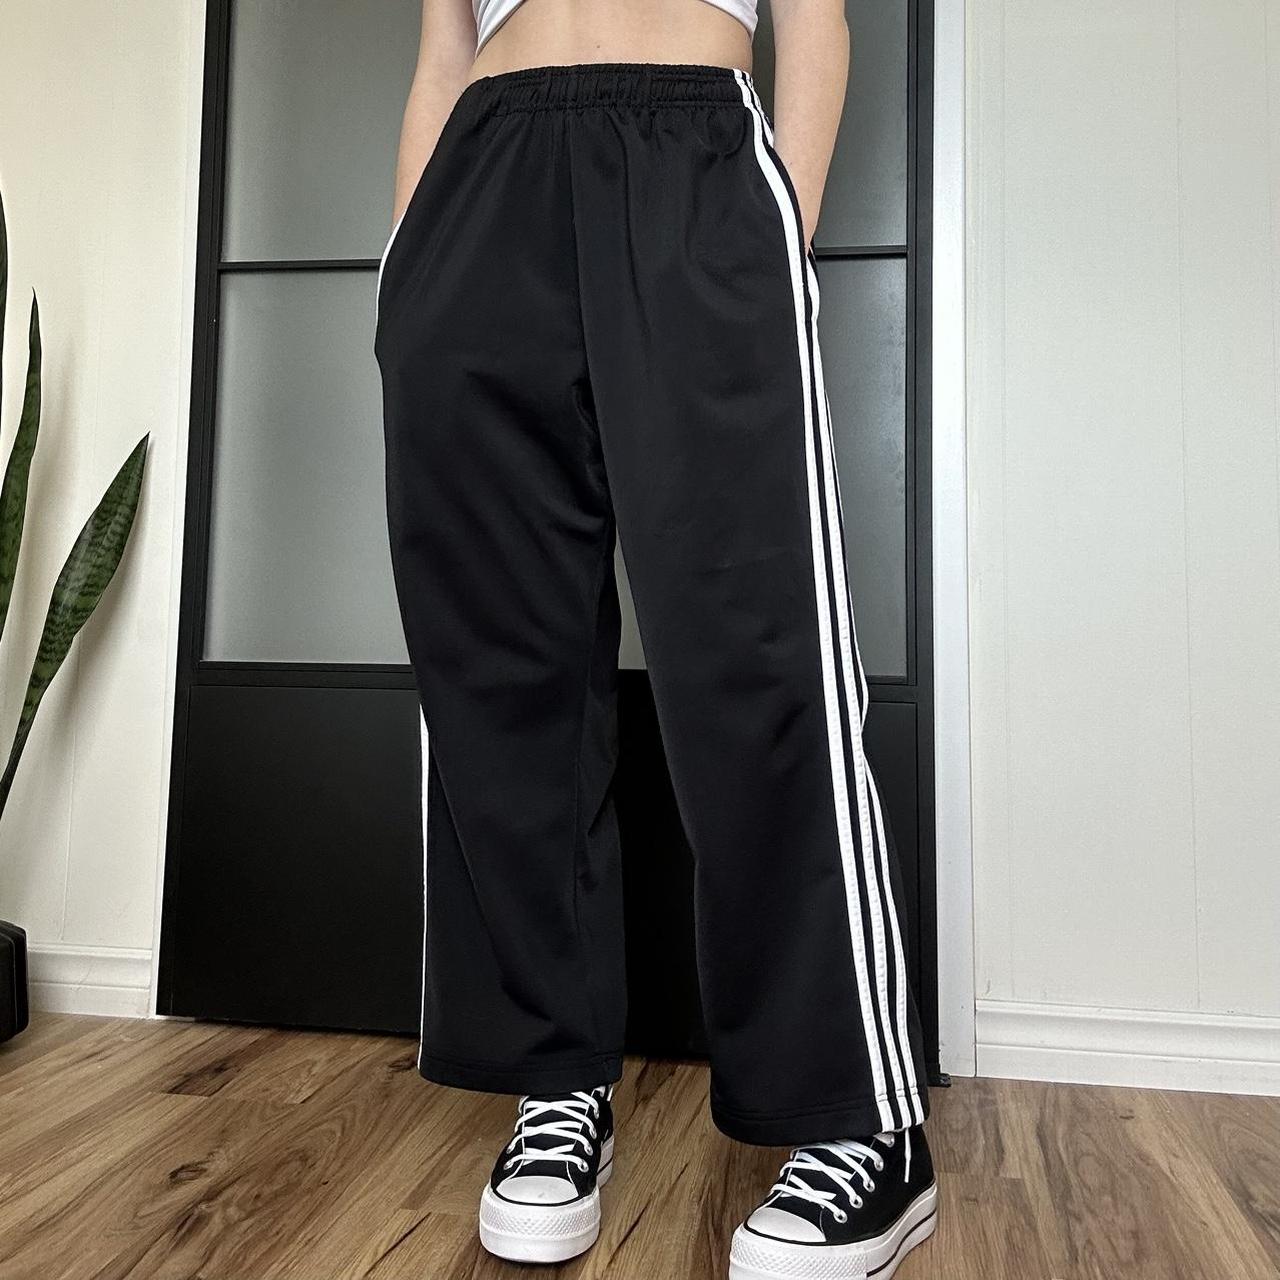 Adidas Women's Black and White Joggers-tracksuits (3)